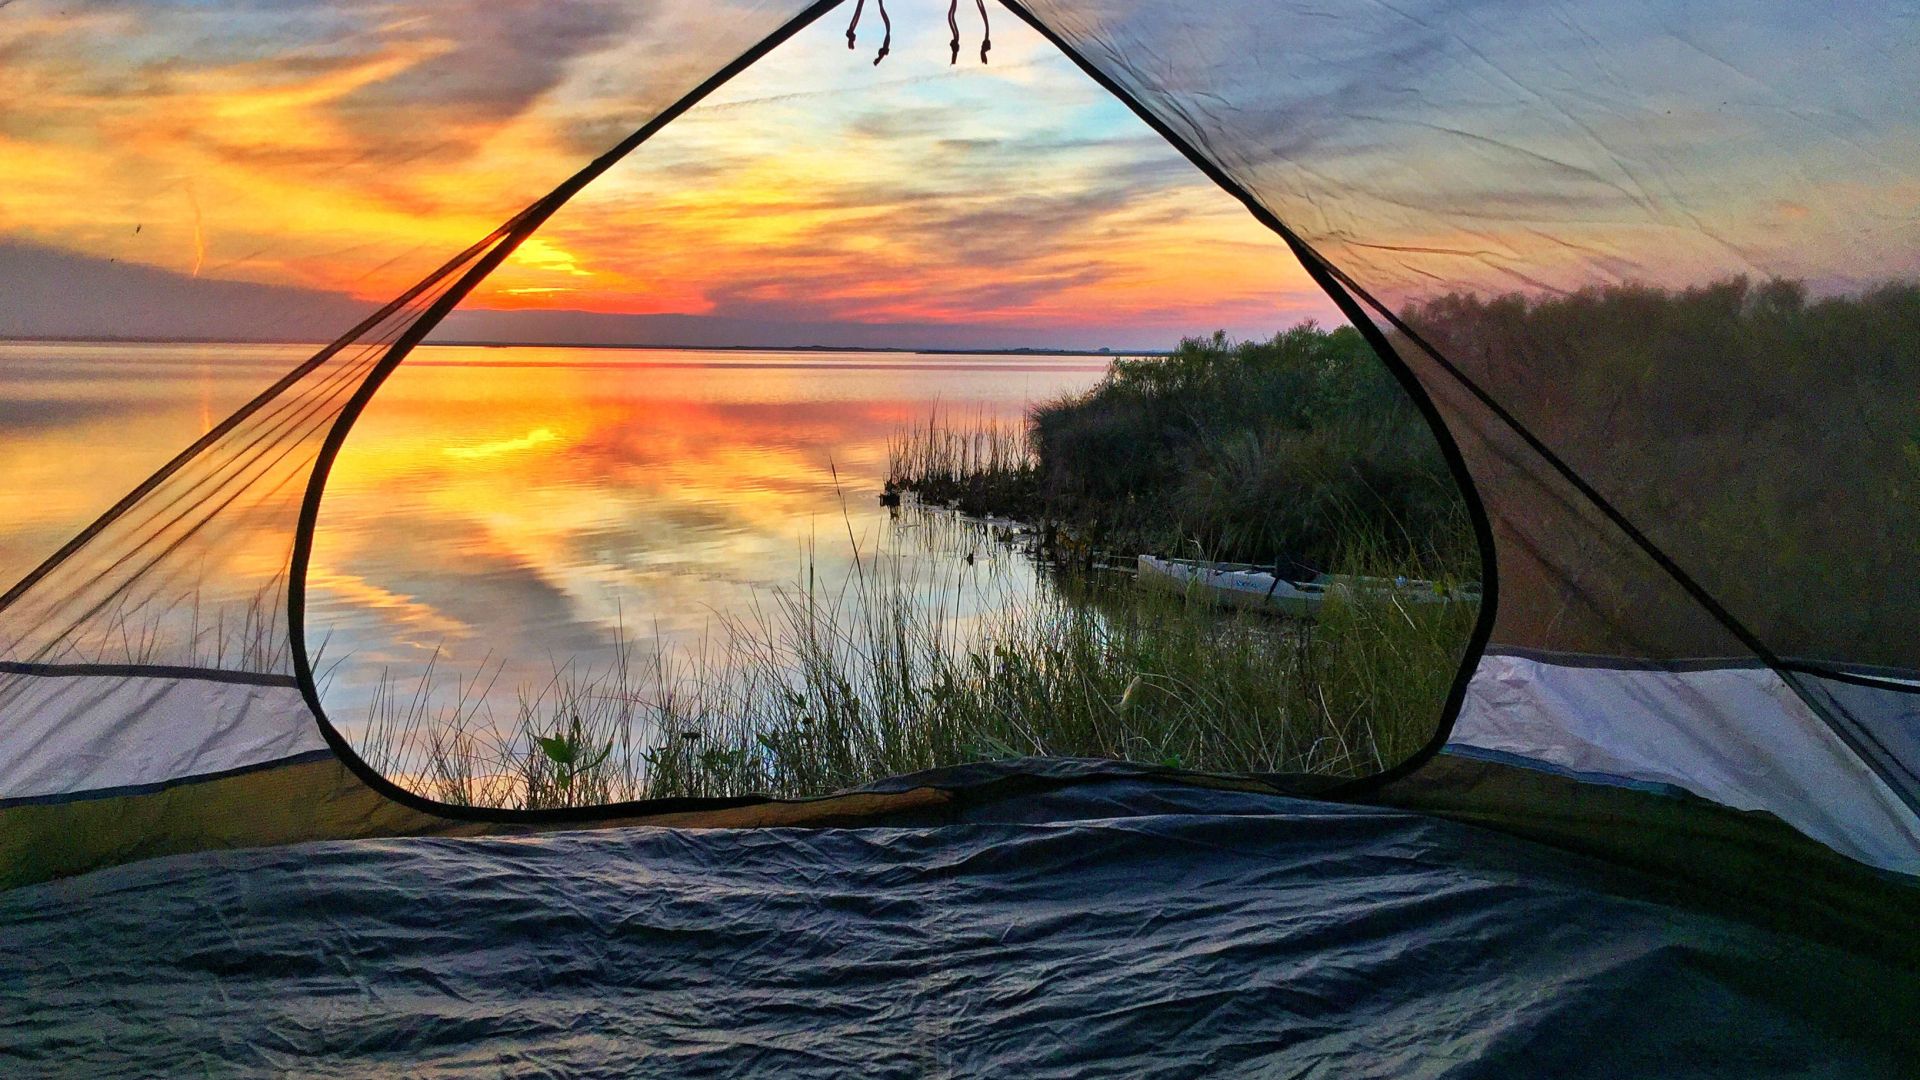 Summer Camping Pictures  Download Free Images on Unsplash